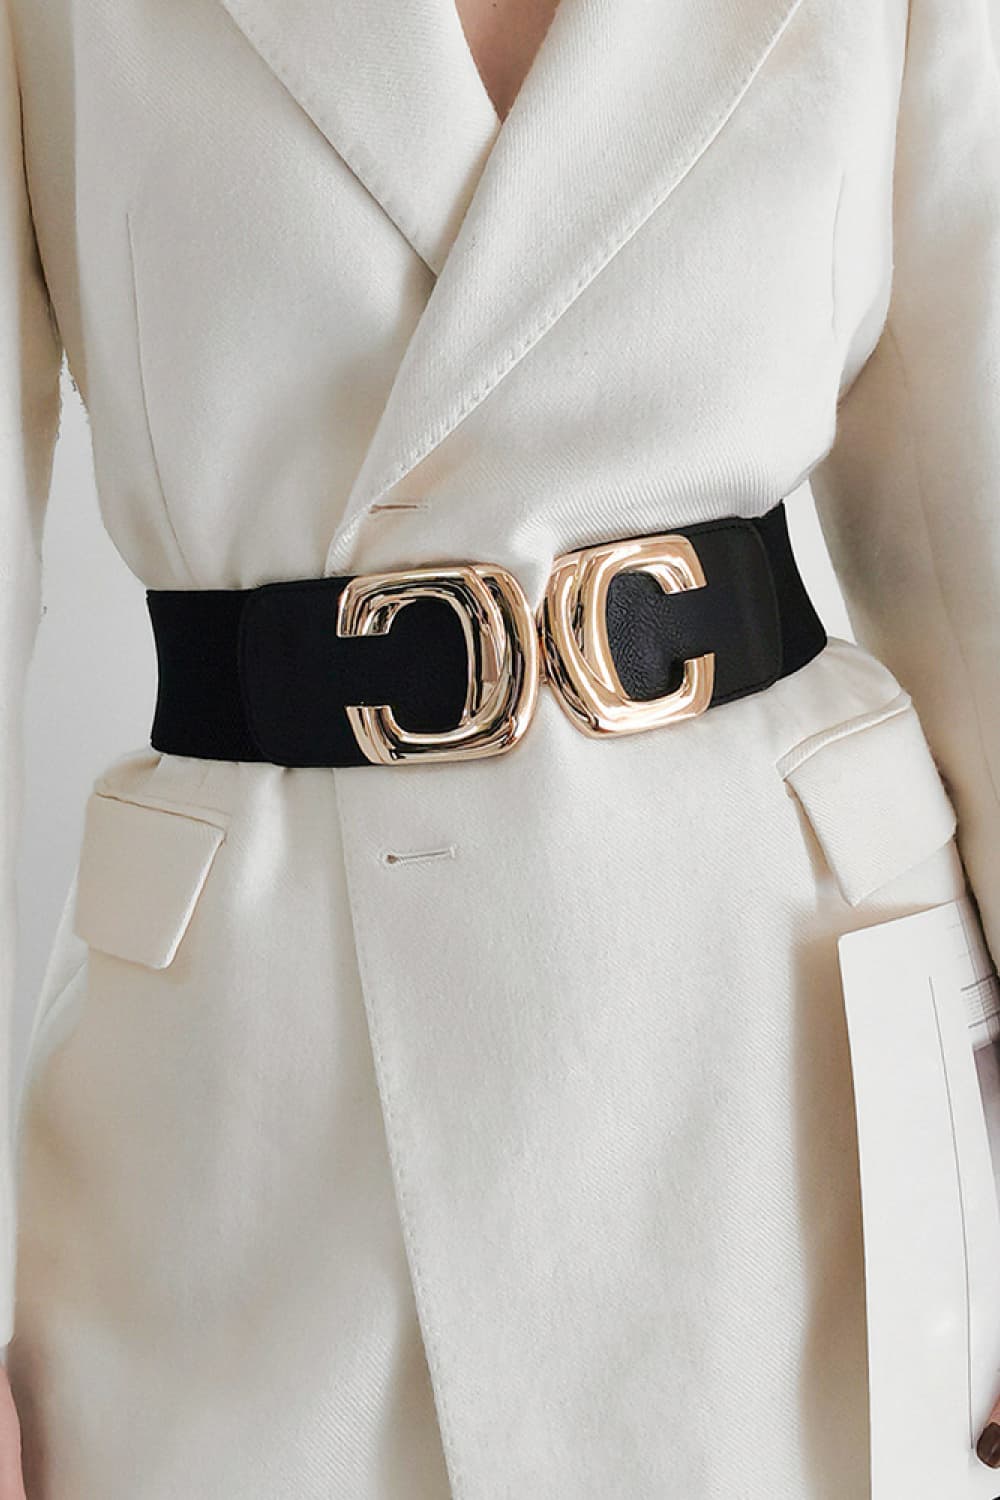 Gucci Belts for sale in Kansas City, Missouri